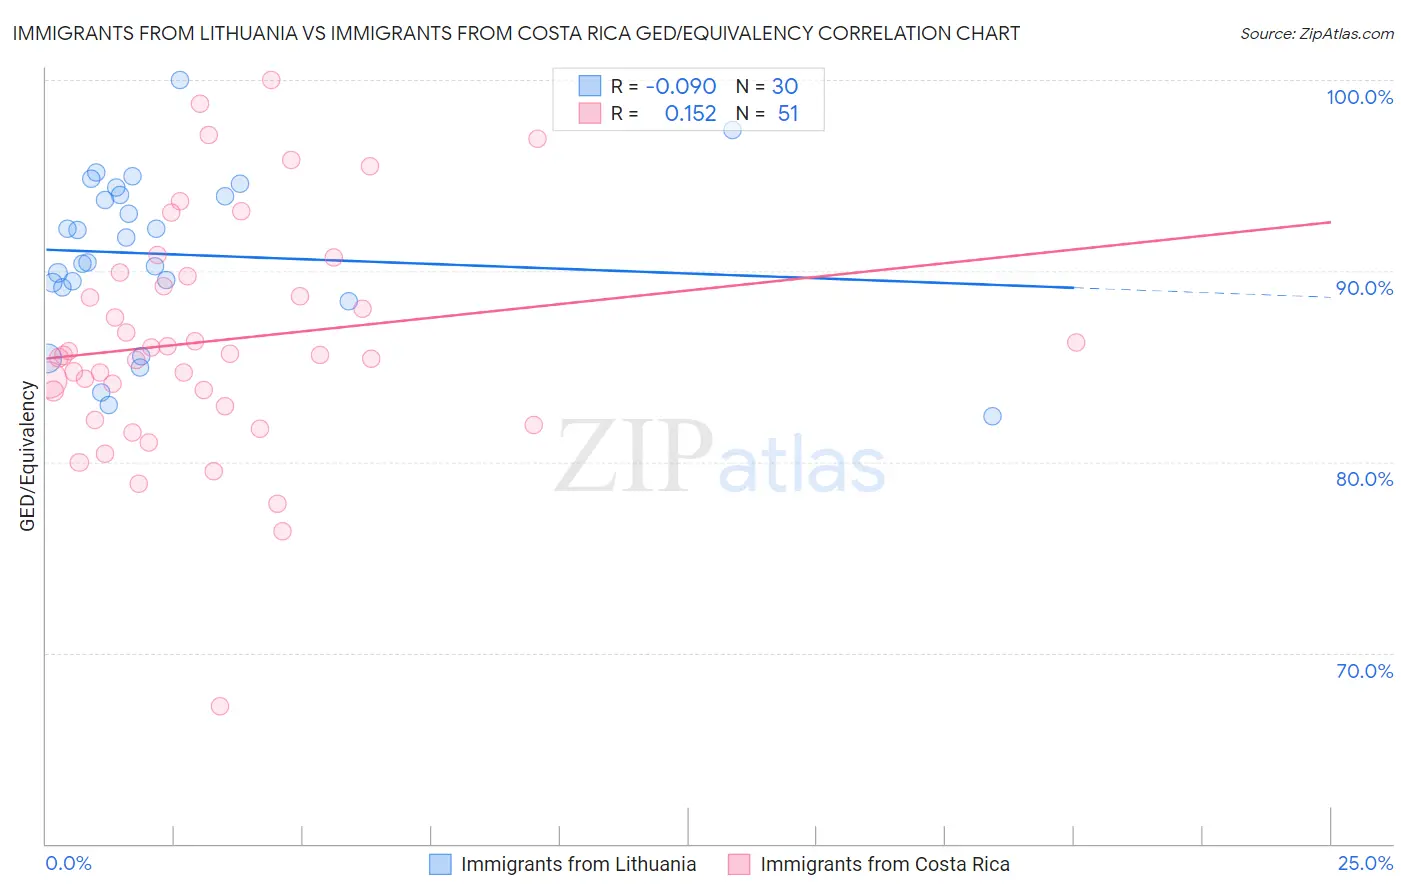 Immigrants from Lithuania vs Immigrants from Costa Rica GED/Equivalency